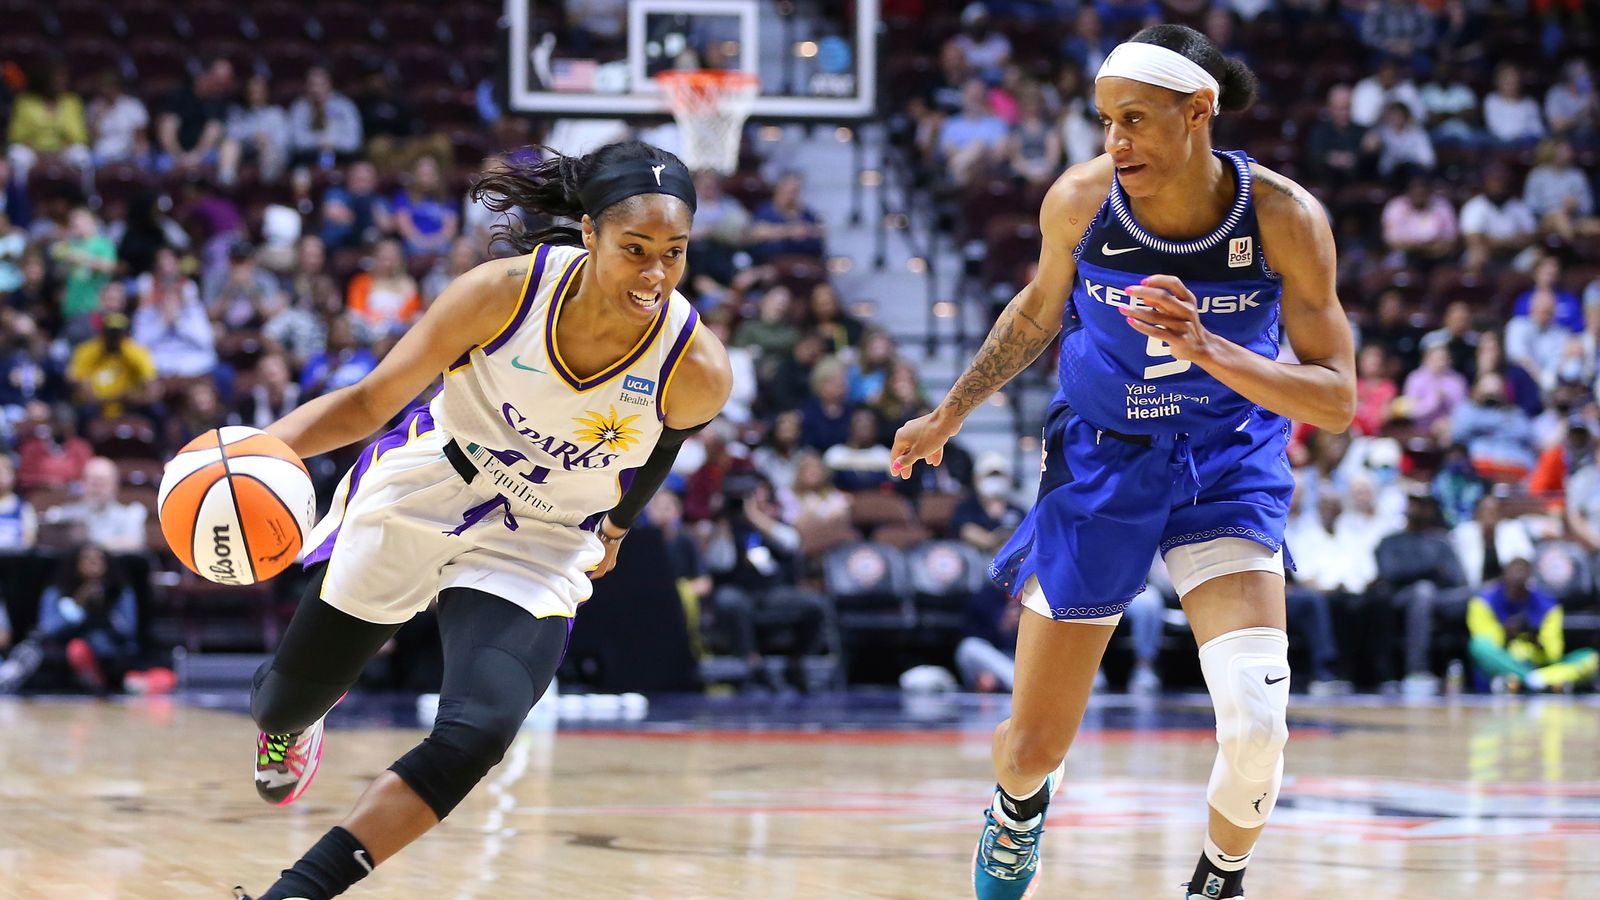 WNBA on X: Legacy and Lights. LA is a basketball town with a rich